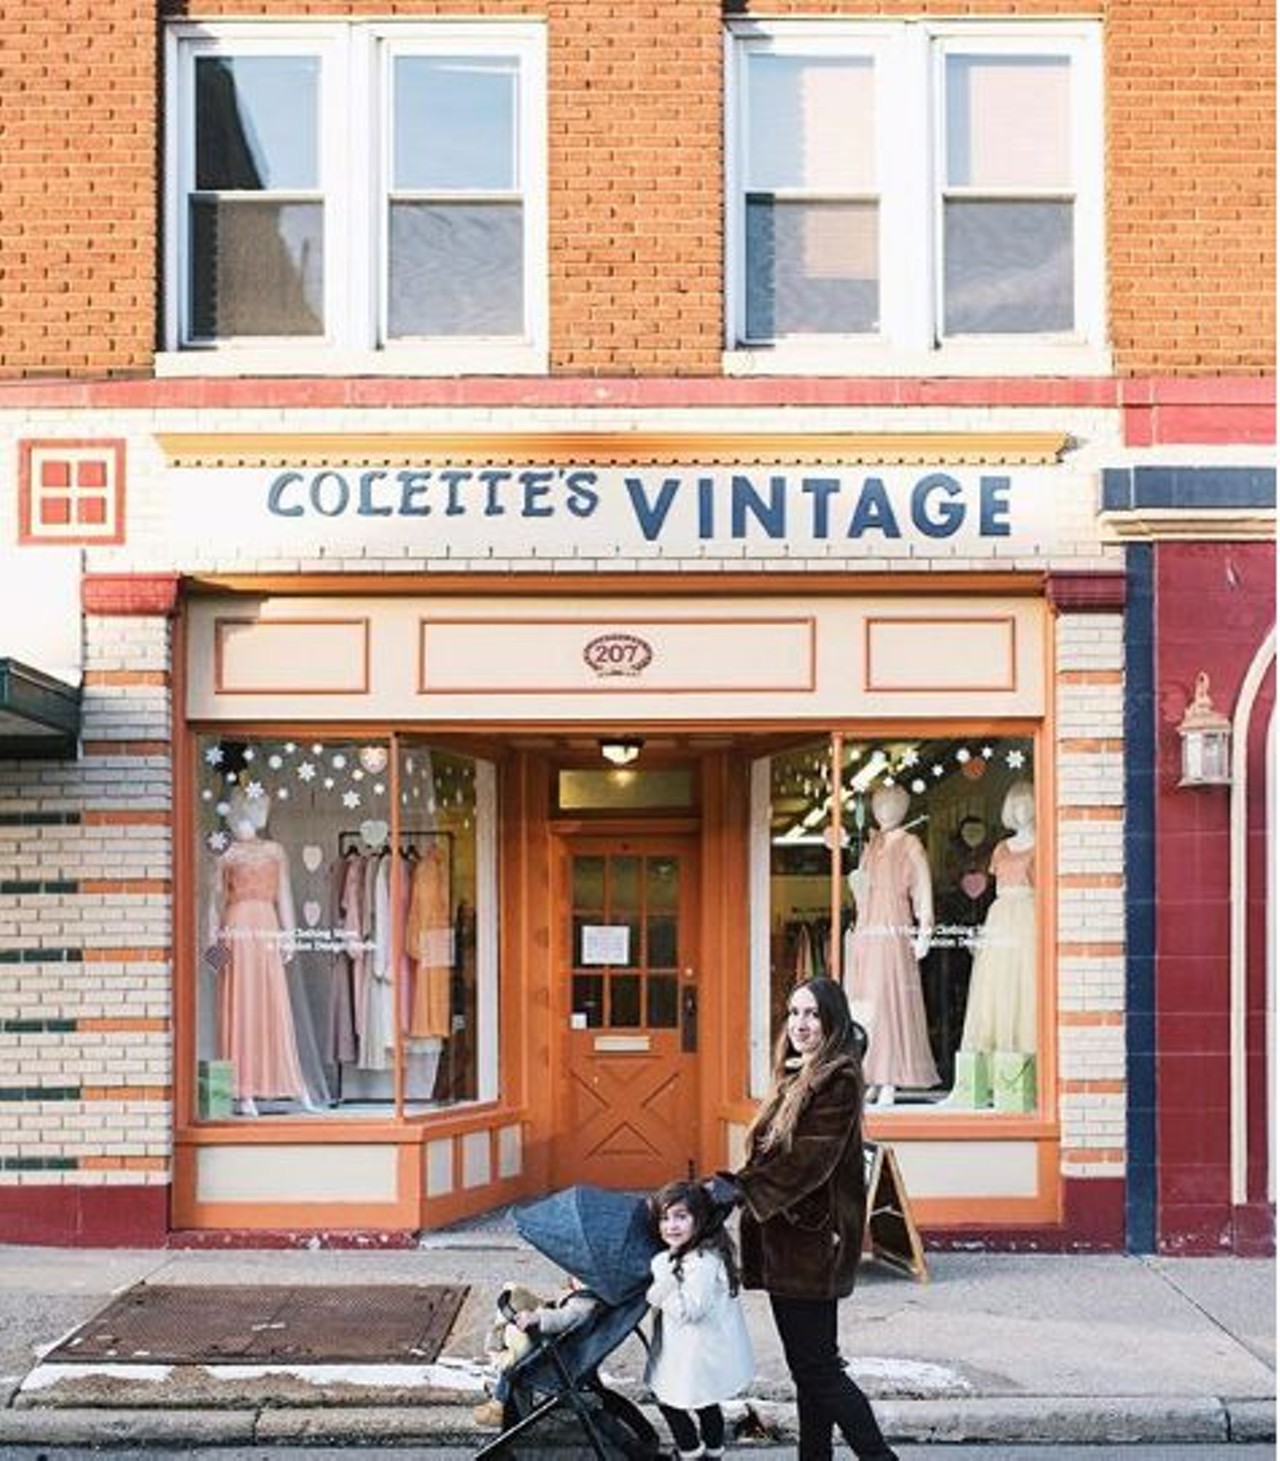  Colette&#146;s Vintage
The pristine storefront, the dedicated following, Collete&#146;s Vintage is a club you&#146;ll want to join. With outfits from every era, this Canton classic is a go-to for all things vintage. 
Photo via mandimakes/Instagram